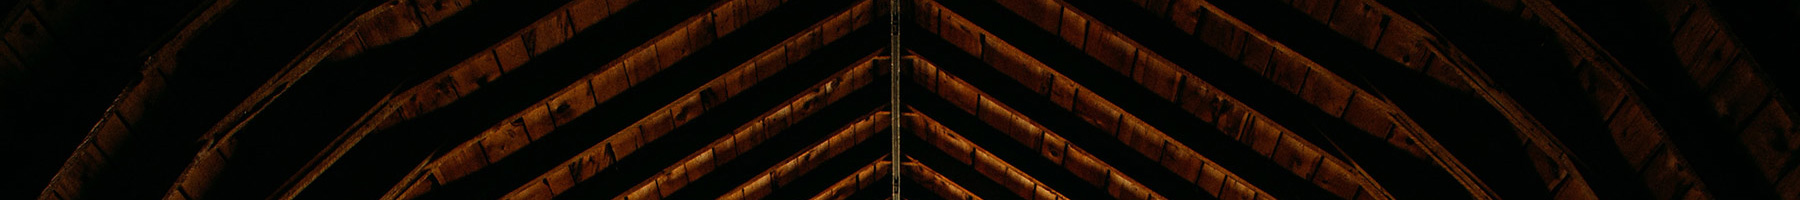 roof of a barn